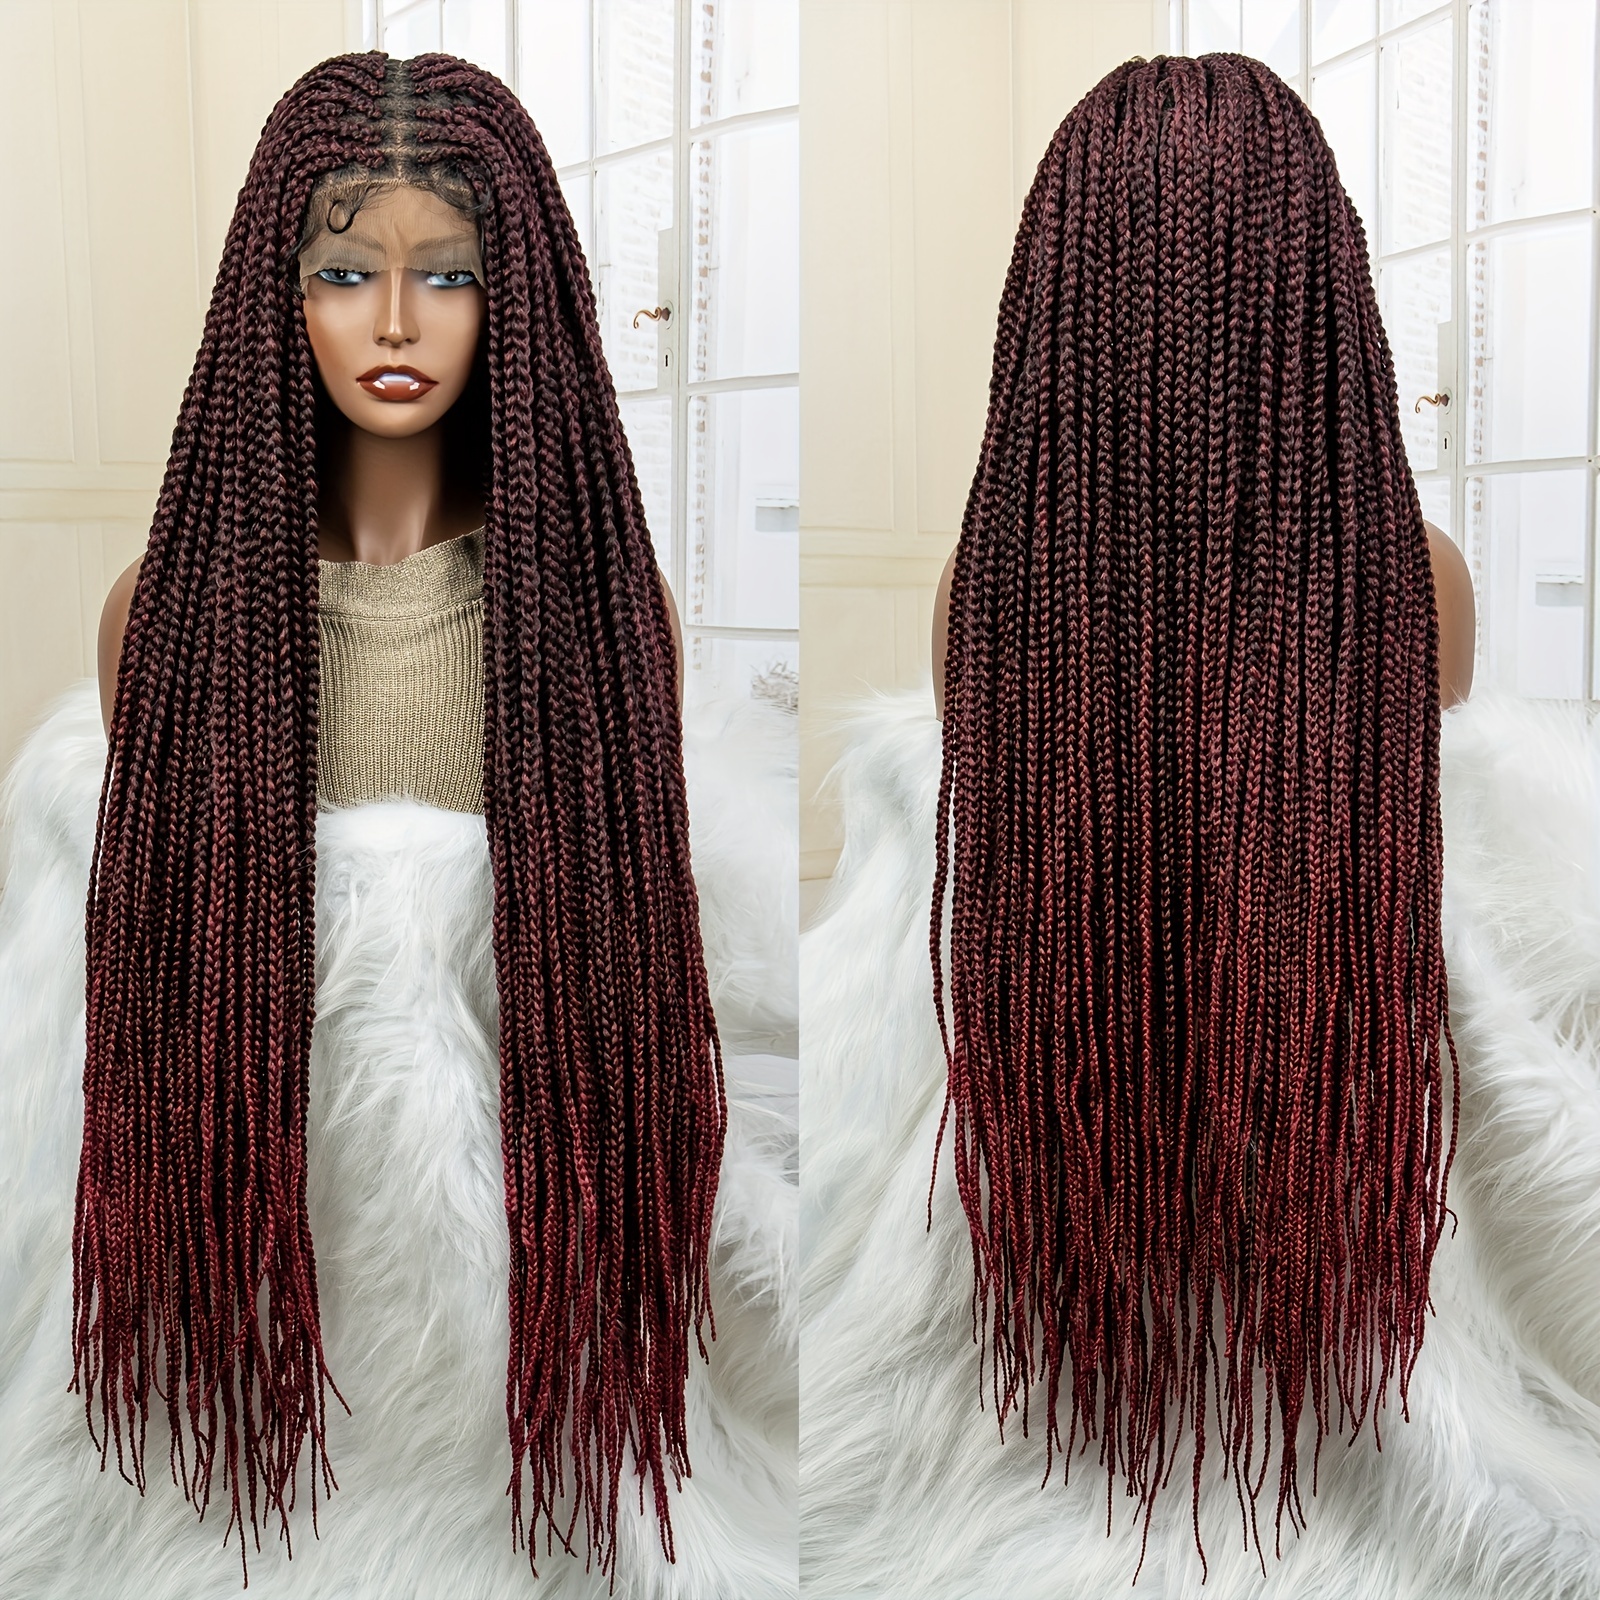  Ebingoo 30 In Wine Red Braided Wig Lace Front Wig for